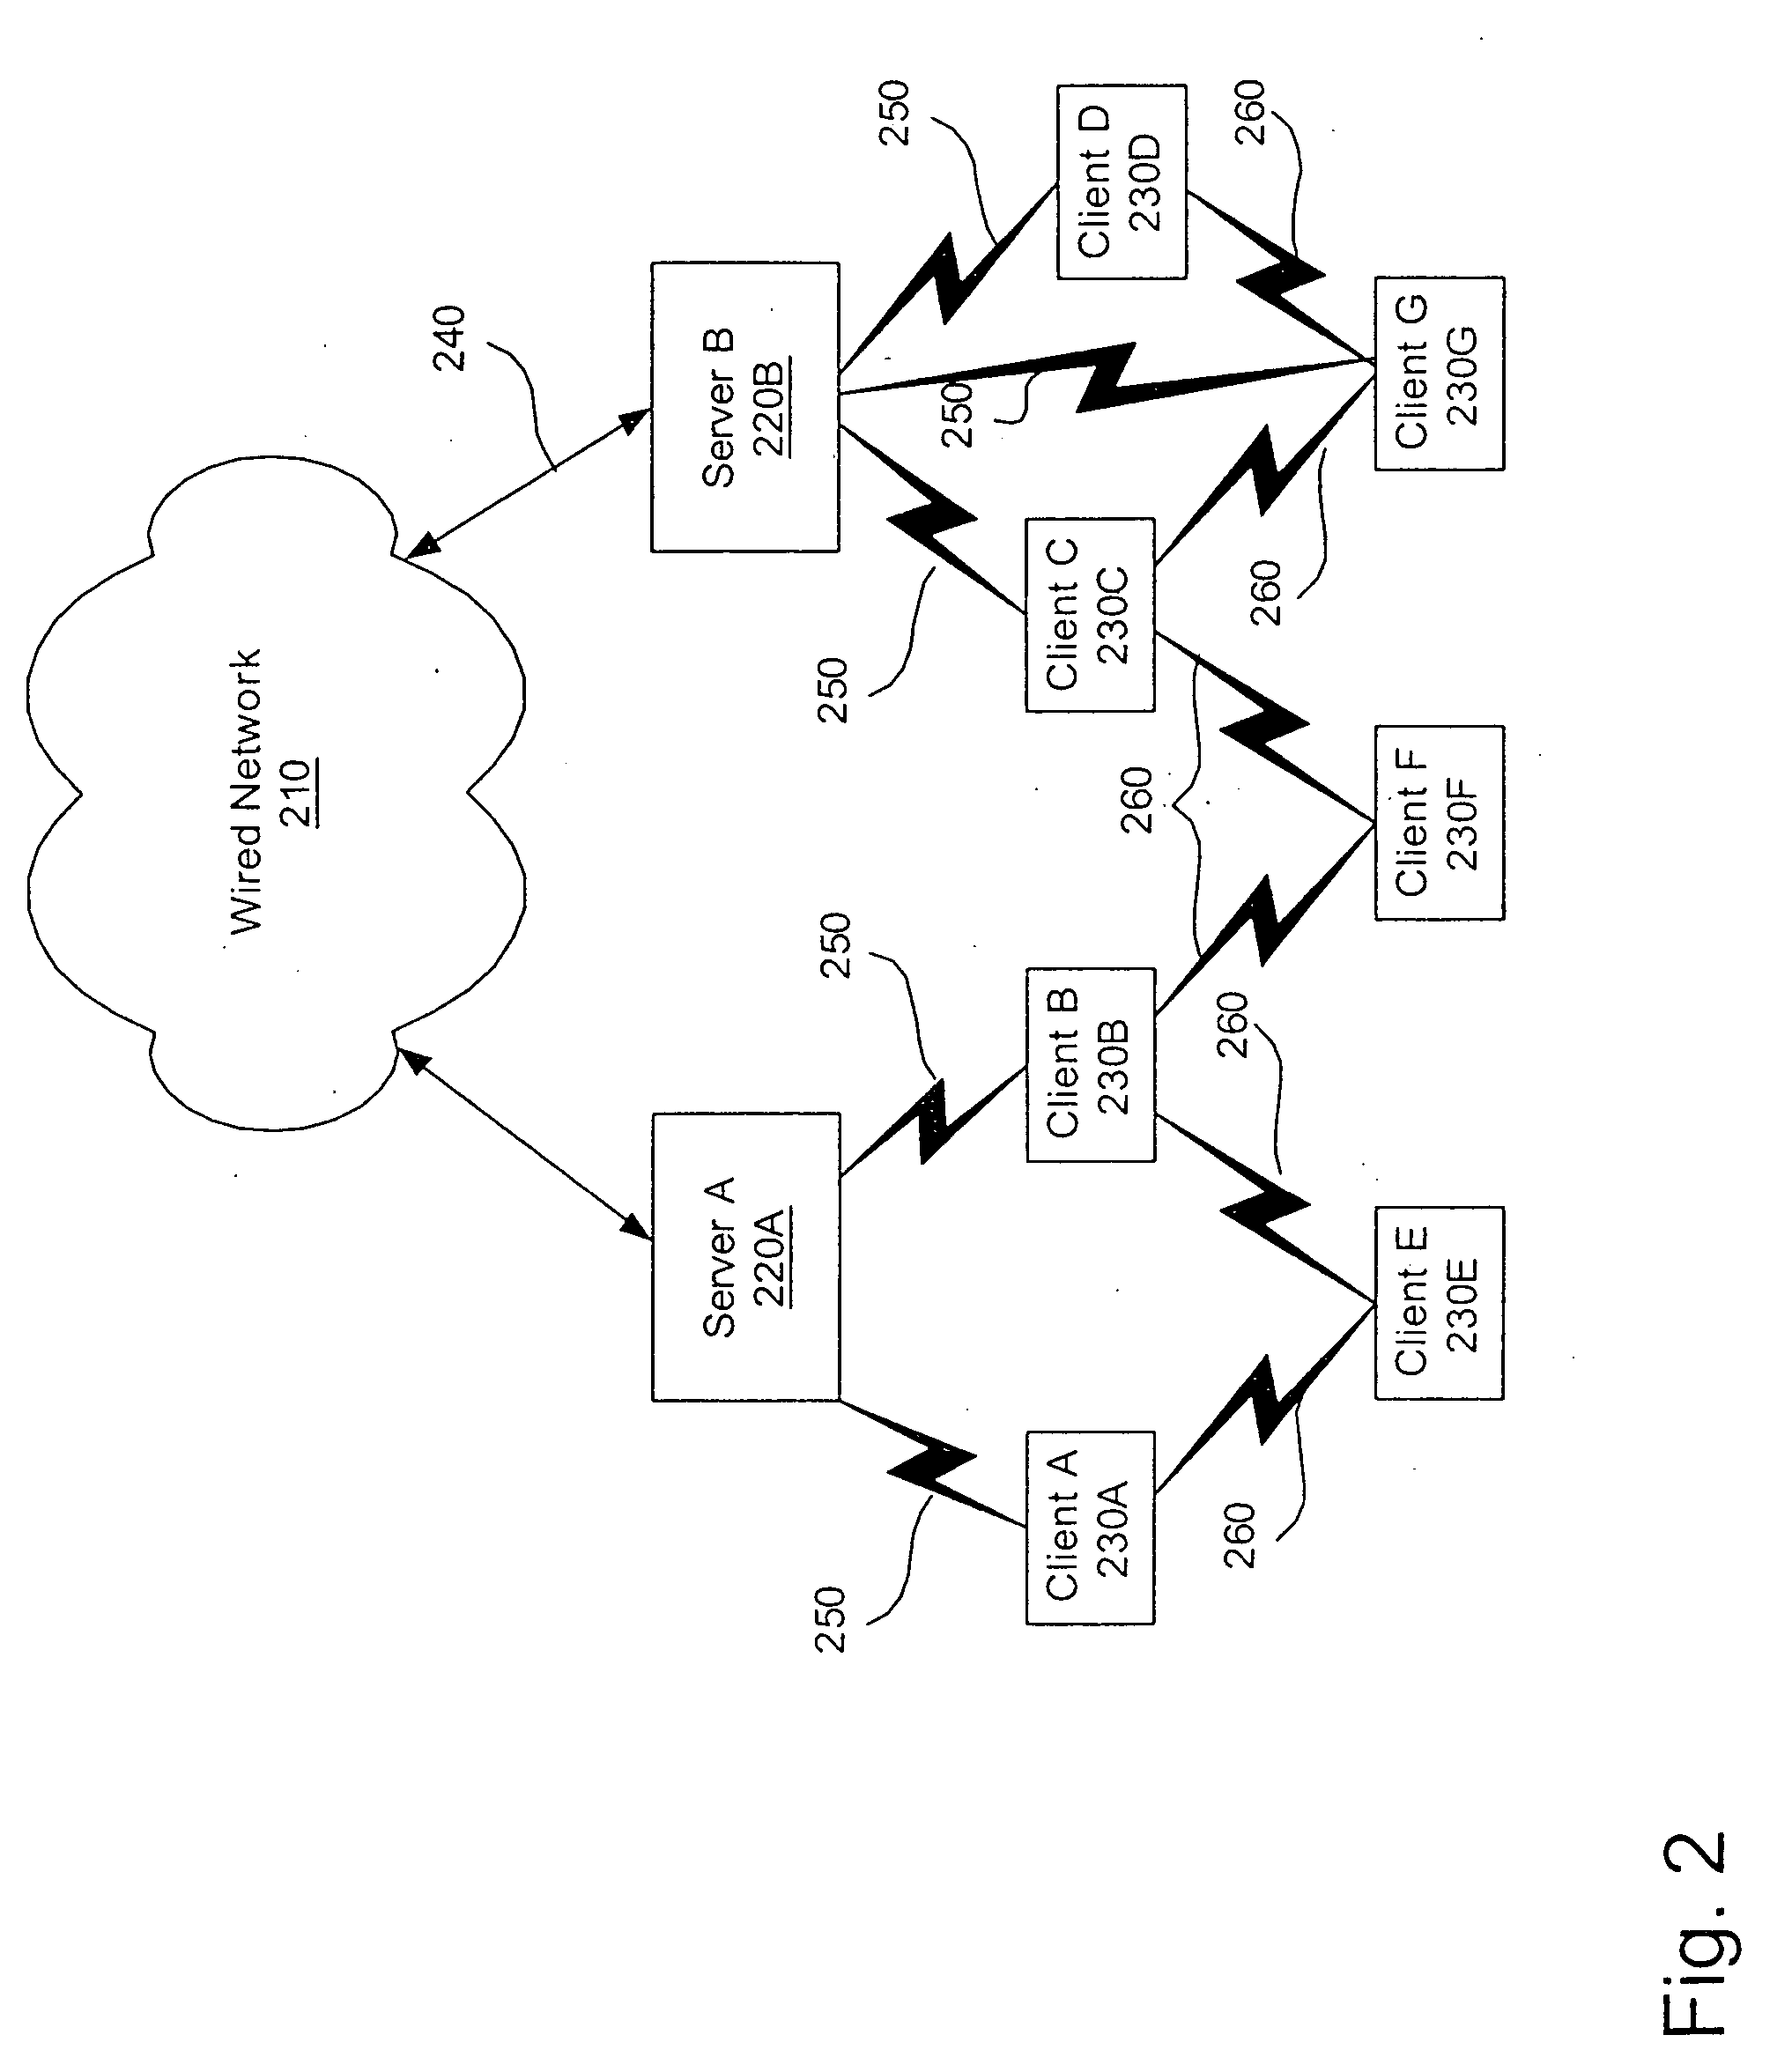 Selection of routing paths based upon path qualities of a wireless routes within a wireless mesh network